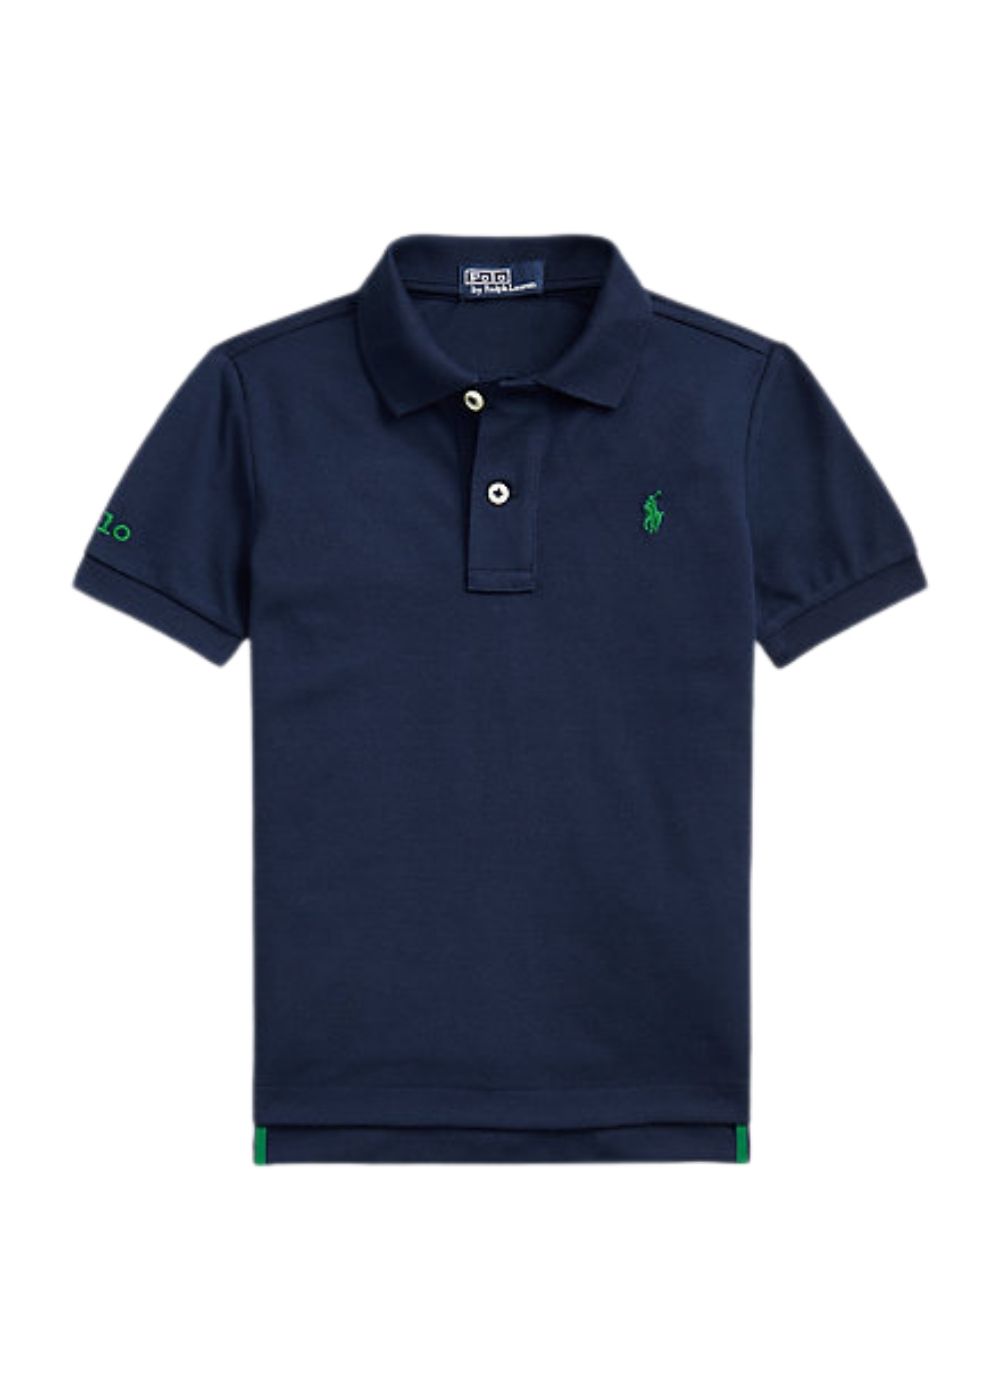 Featured image for “Polo Ralph Lauren Earth Polo”